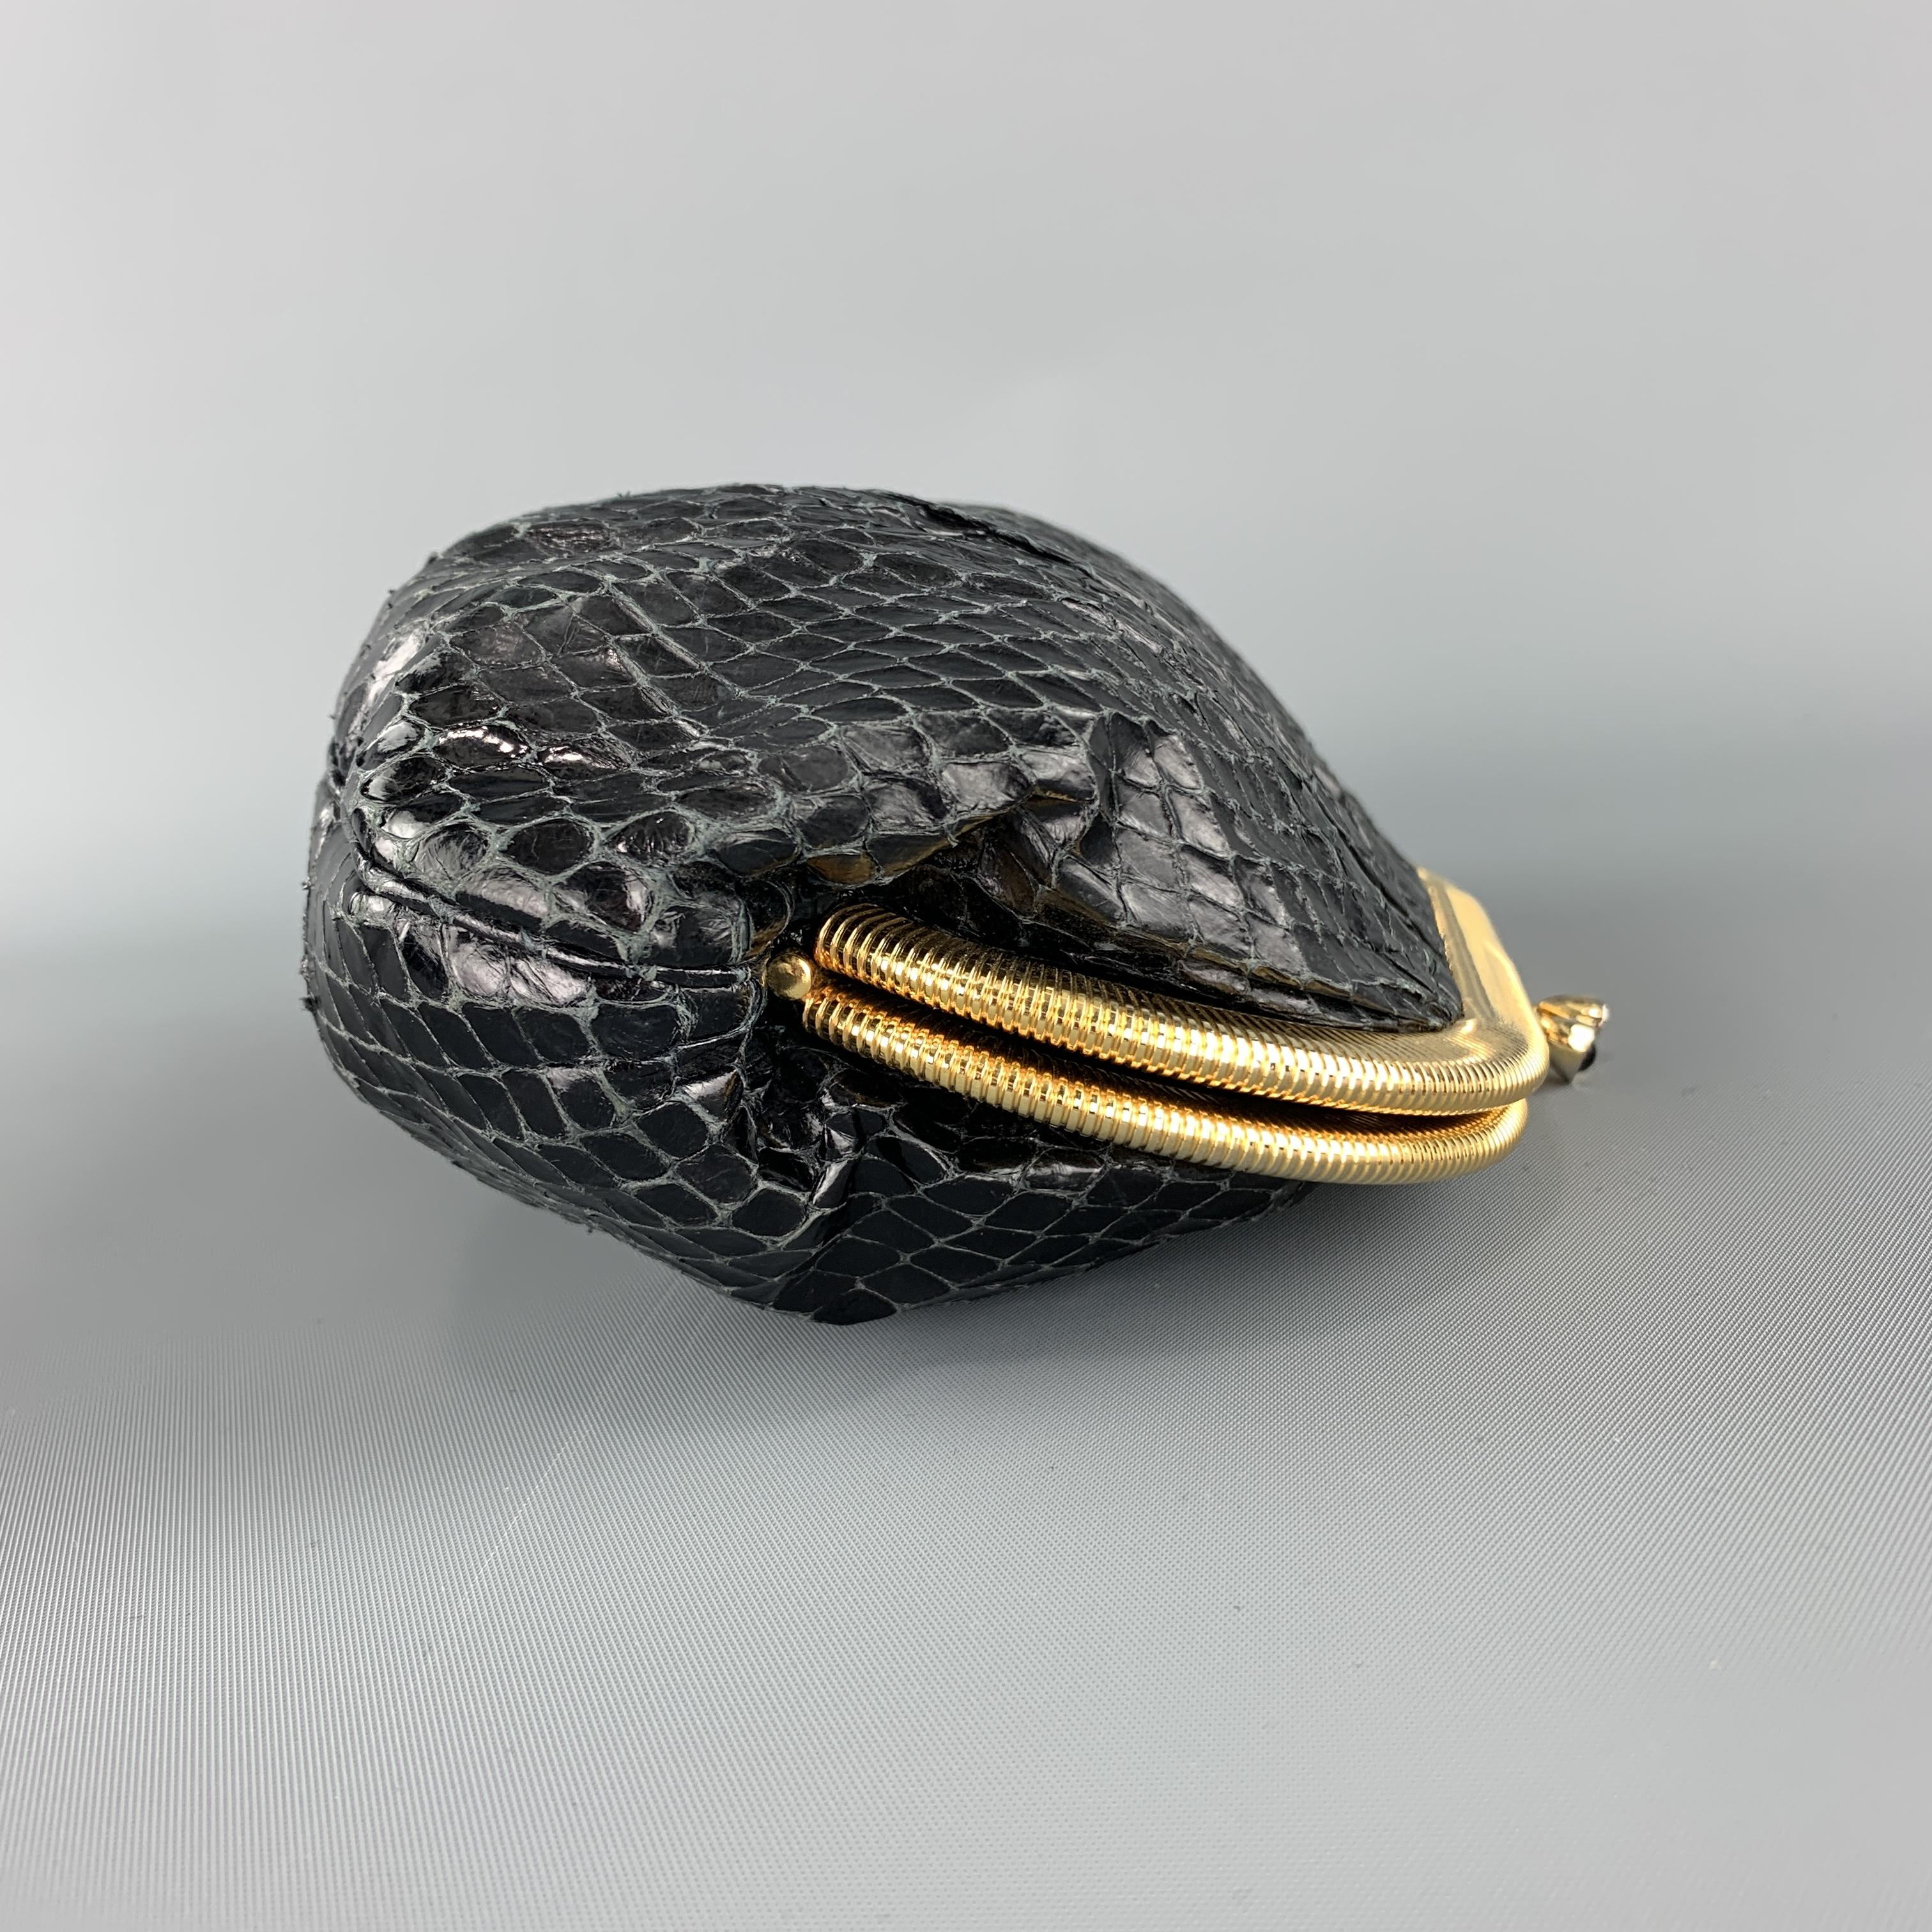 JUDITH LEIBER evening clutch comes in black pleated snake skin leather with a gold tone kiss lock closure and chain strap. 

Excellent Pre-Owned Condition.

Measurements:

Length: 8 in.
Width: 2 in.
Height: 5 in.
Drop: 20 in.